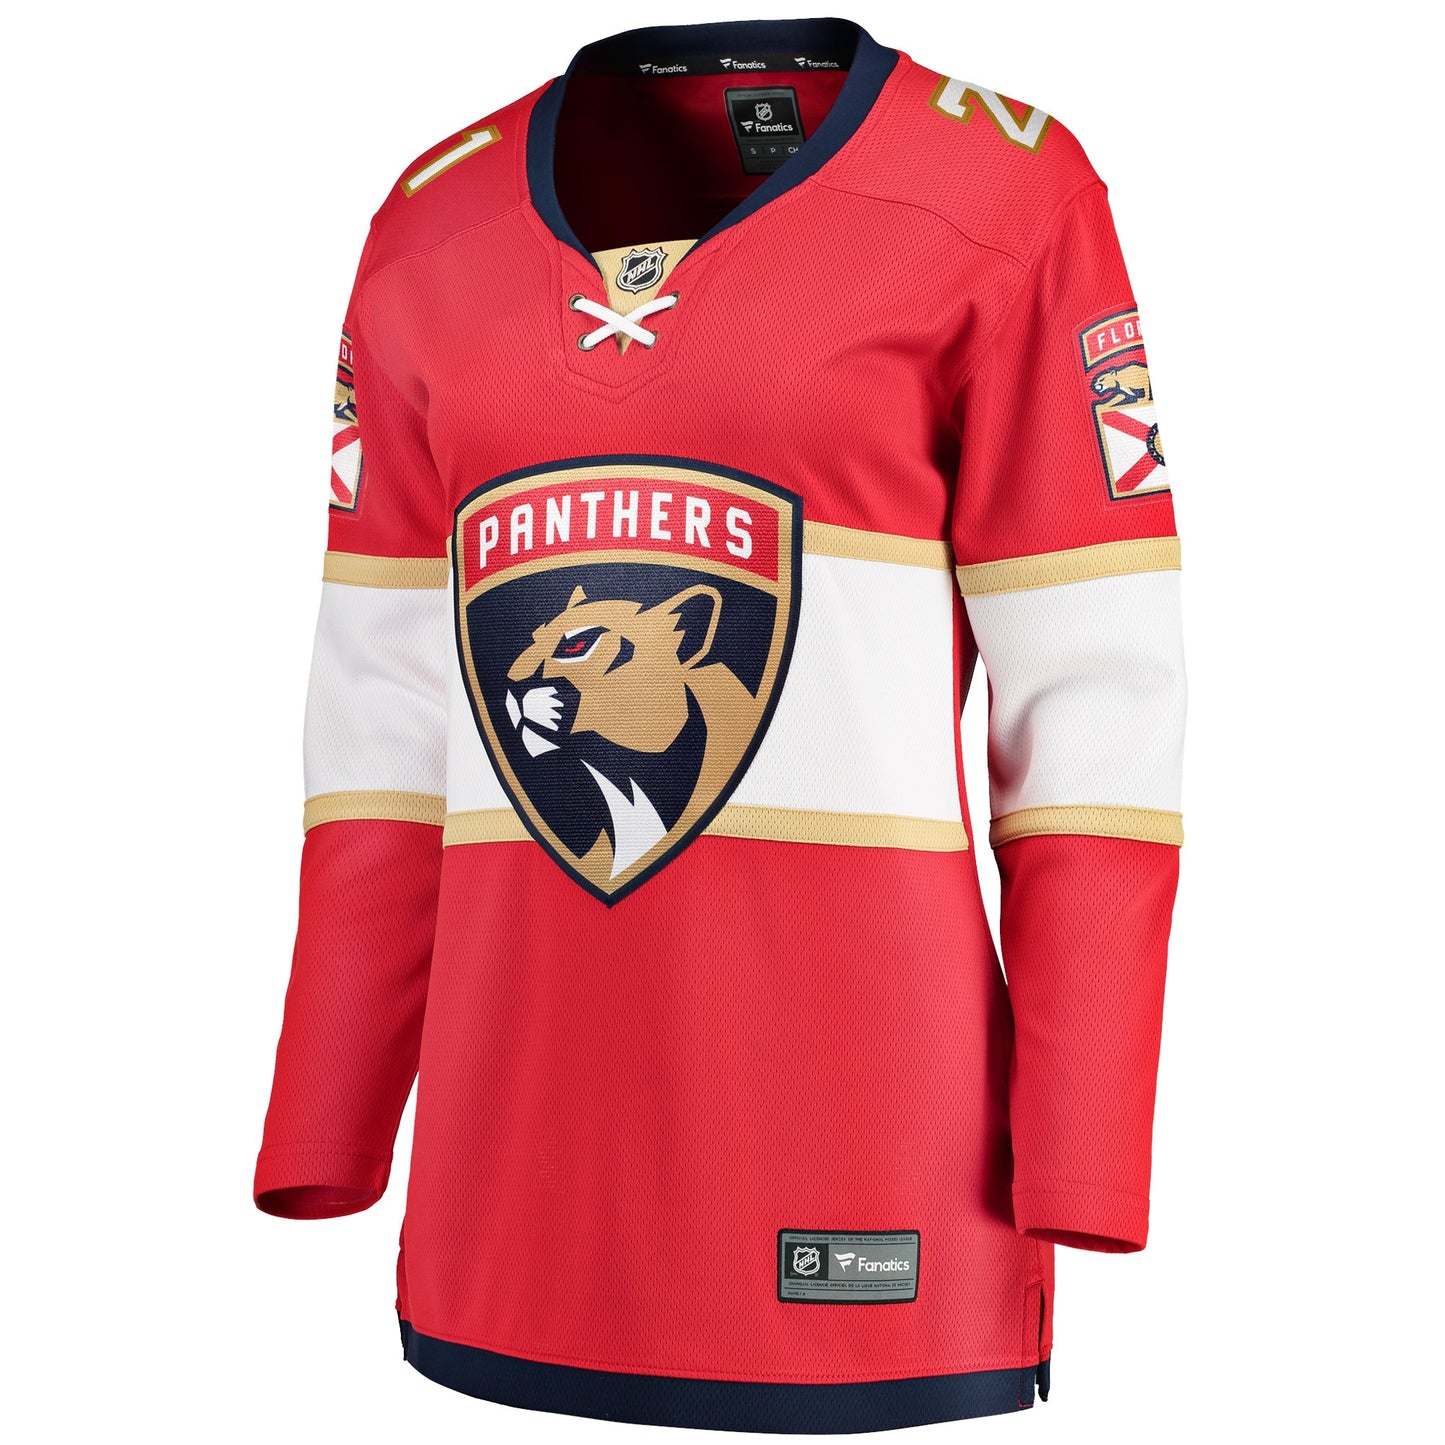 Nick Cousins Florida Panthers Fanatics Branded Women's Home Breakaway Player Jersey - Red